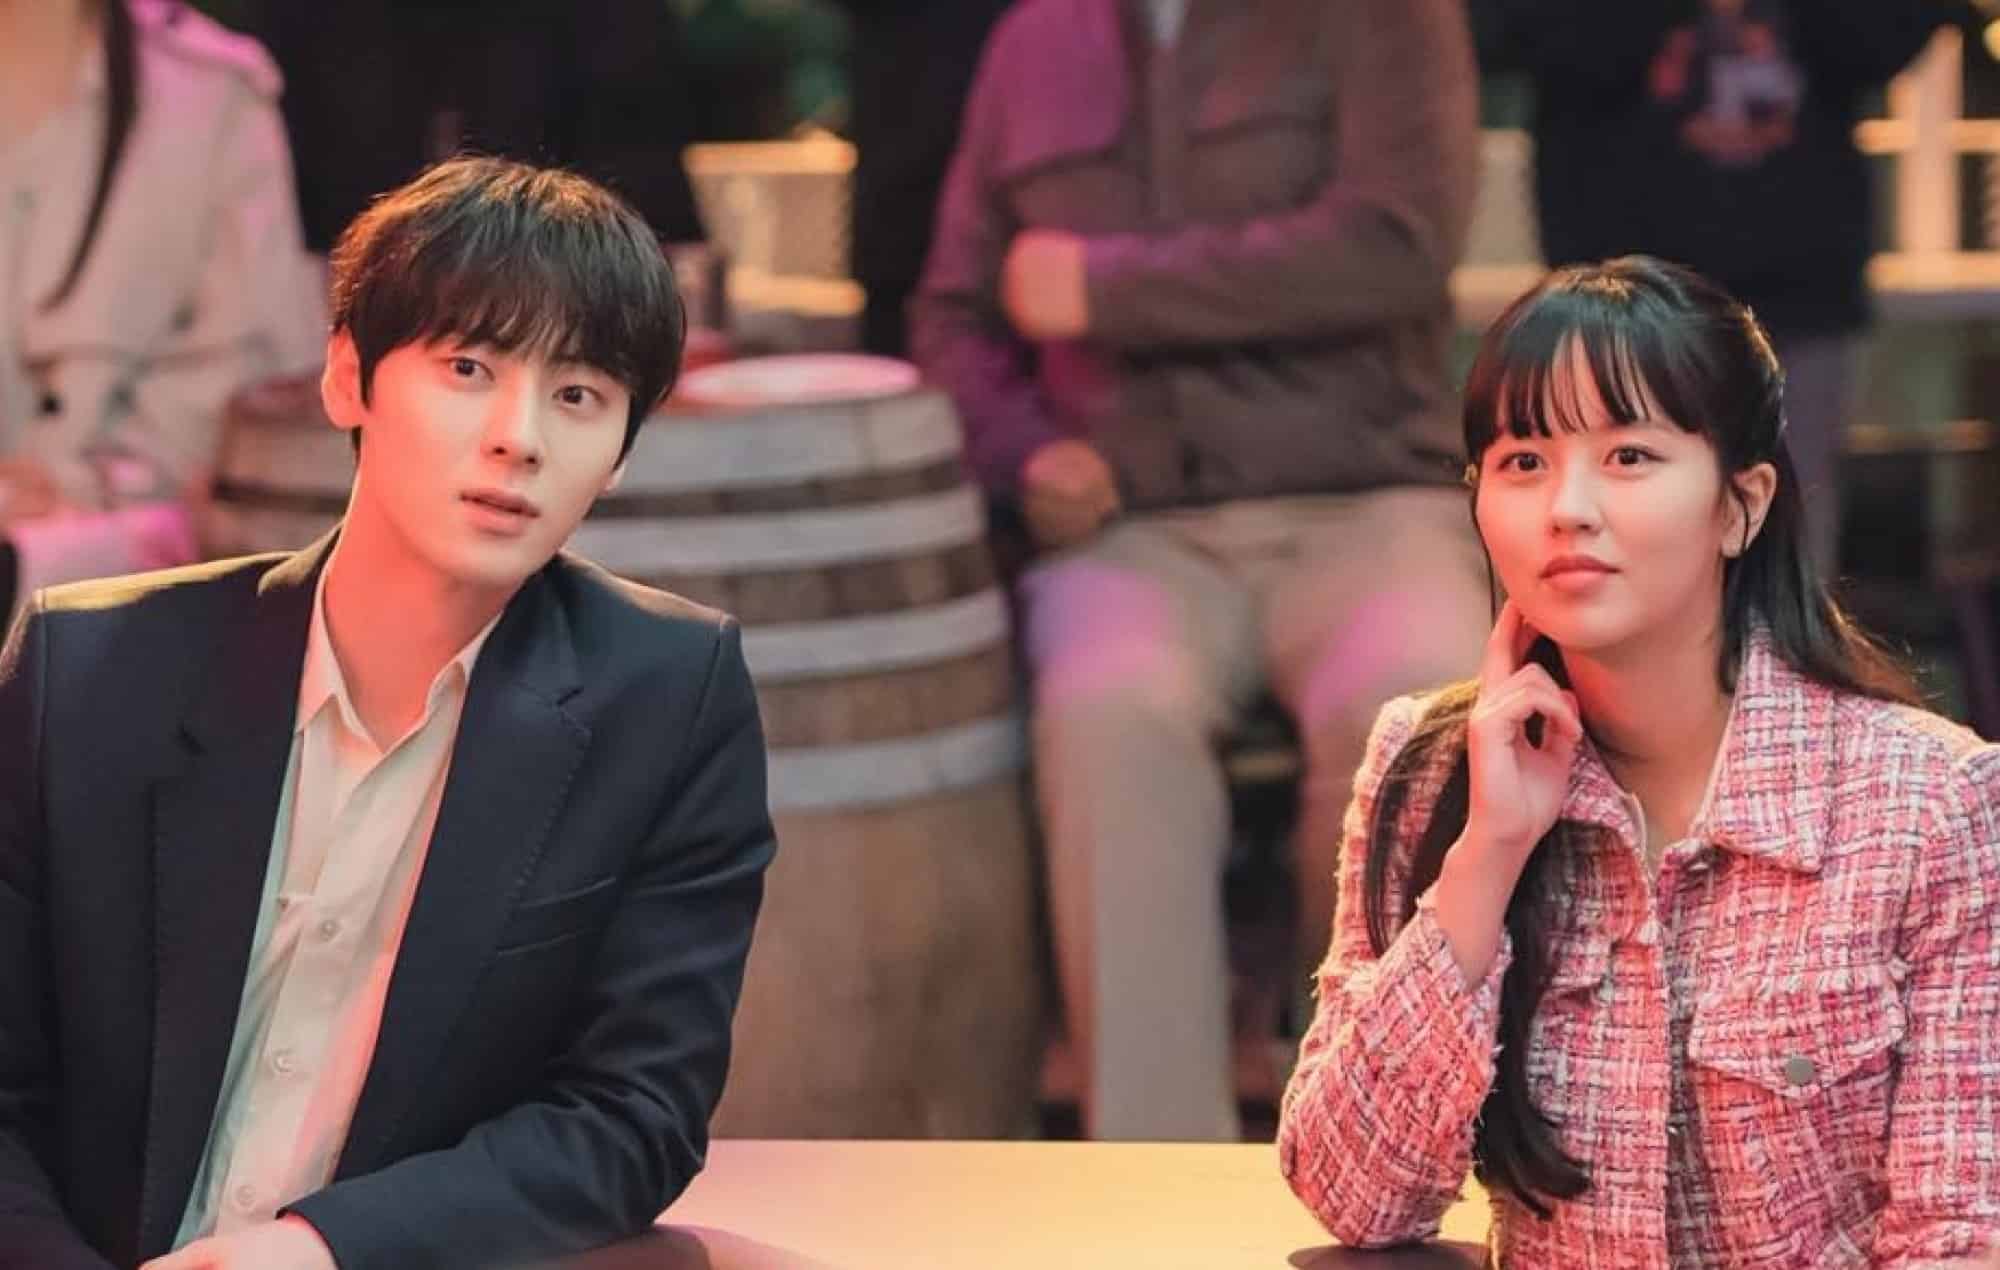 My Lovely Liar Episode 3: Release date and Preview